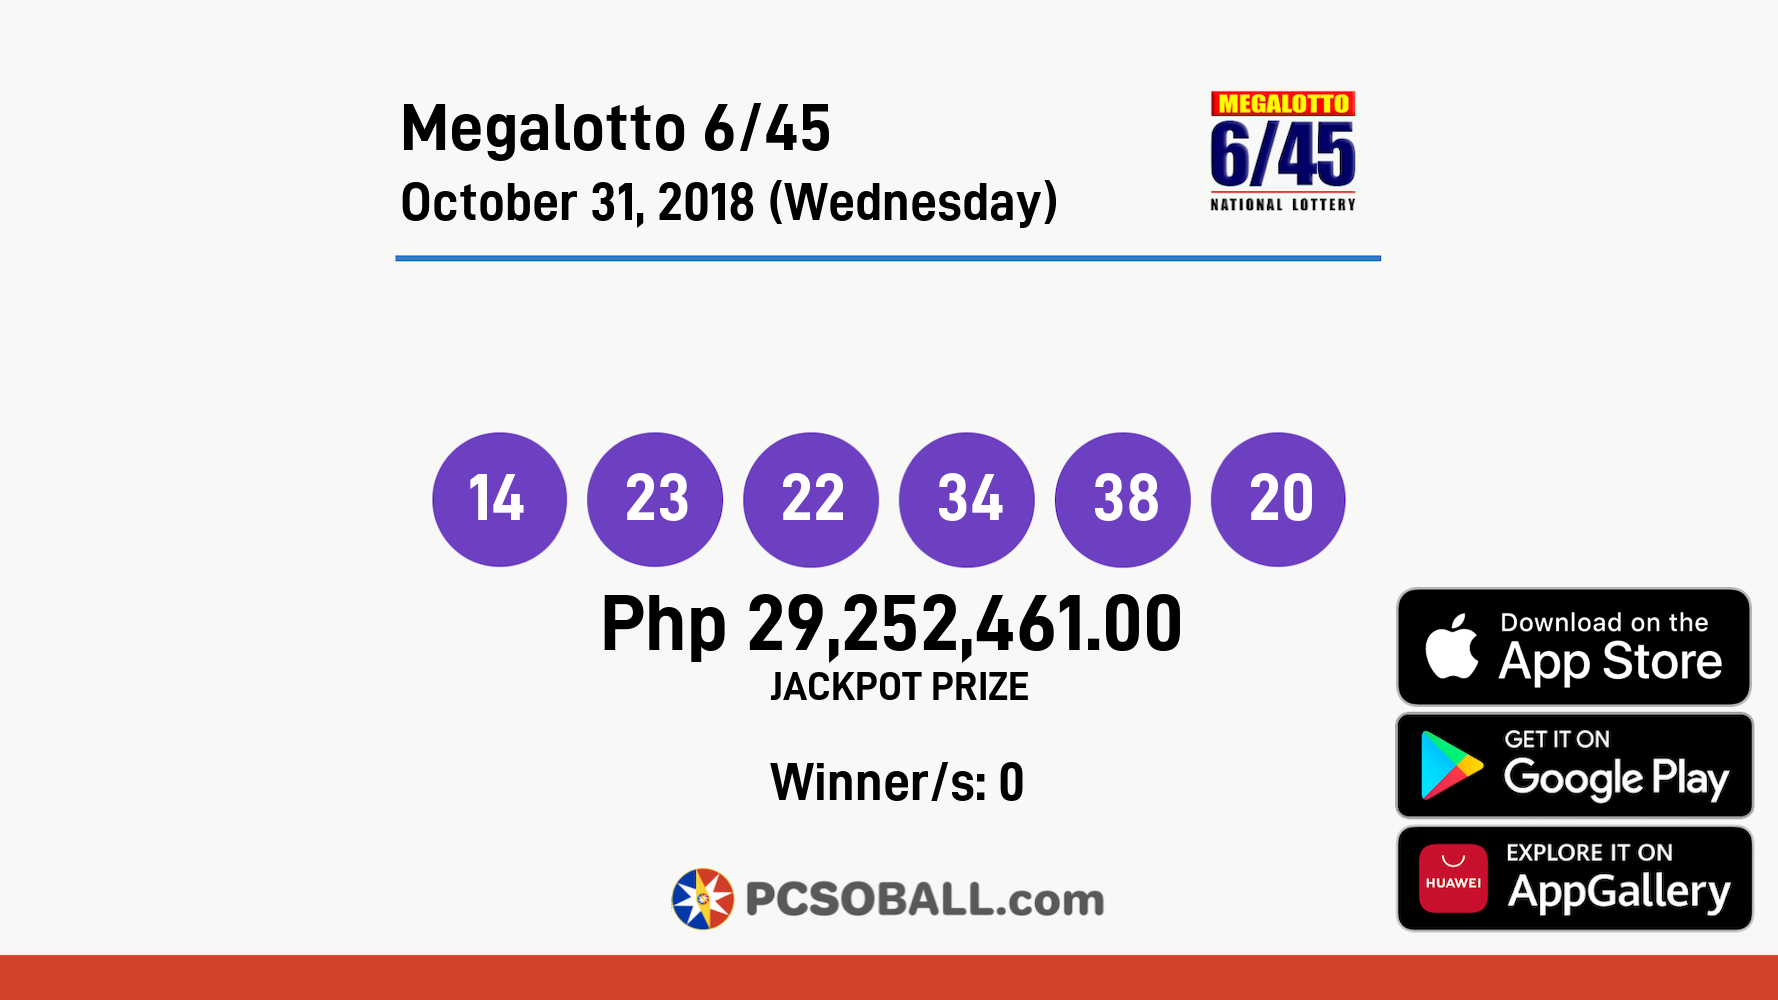 Megalotto 6/45 October 31, 2018 (Wednesday) Result